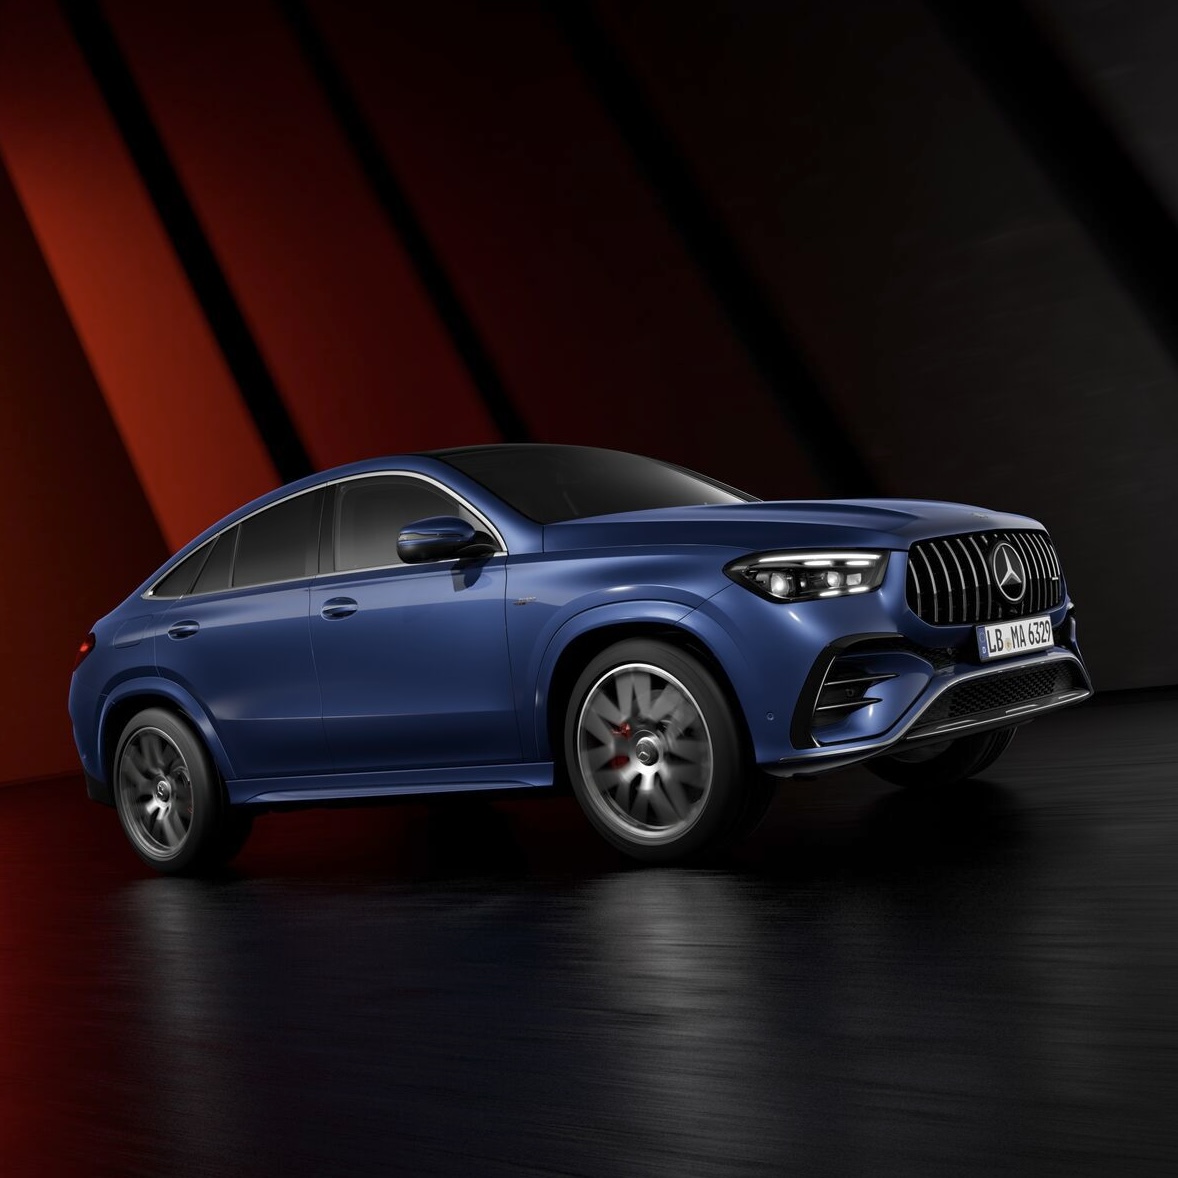 Leaves a trail of brilliance. Creates unrivalled adventures anywhere it goes. Meet the new Mercedes-AMG GLE Coupé.

#MercedesAMG #AMG #AMGPremiere #AMGThrill #BuiltBold